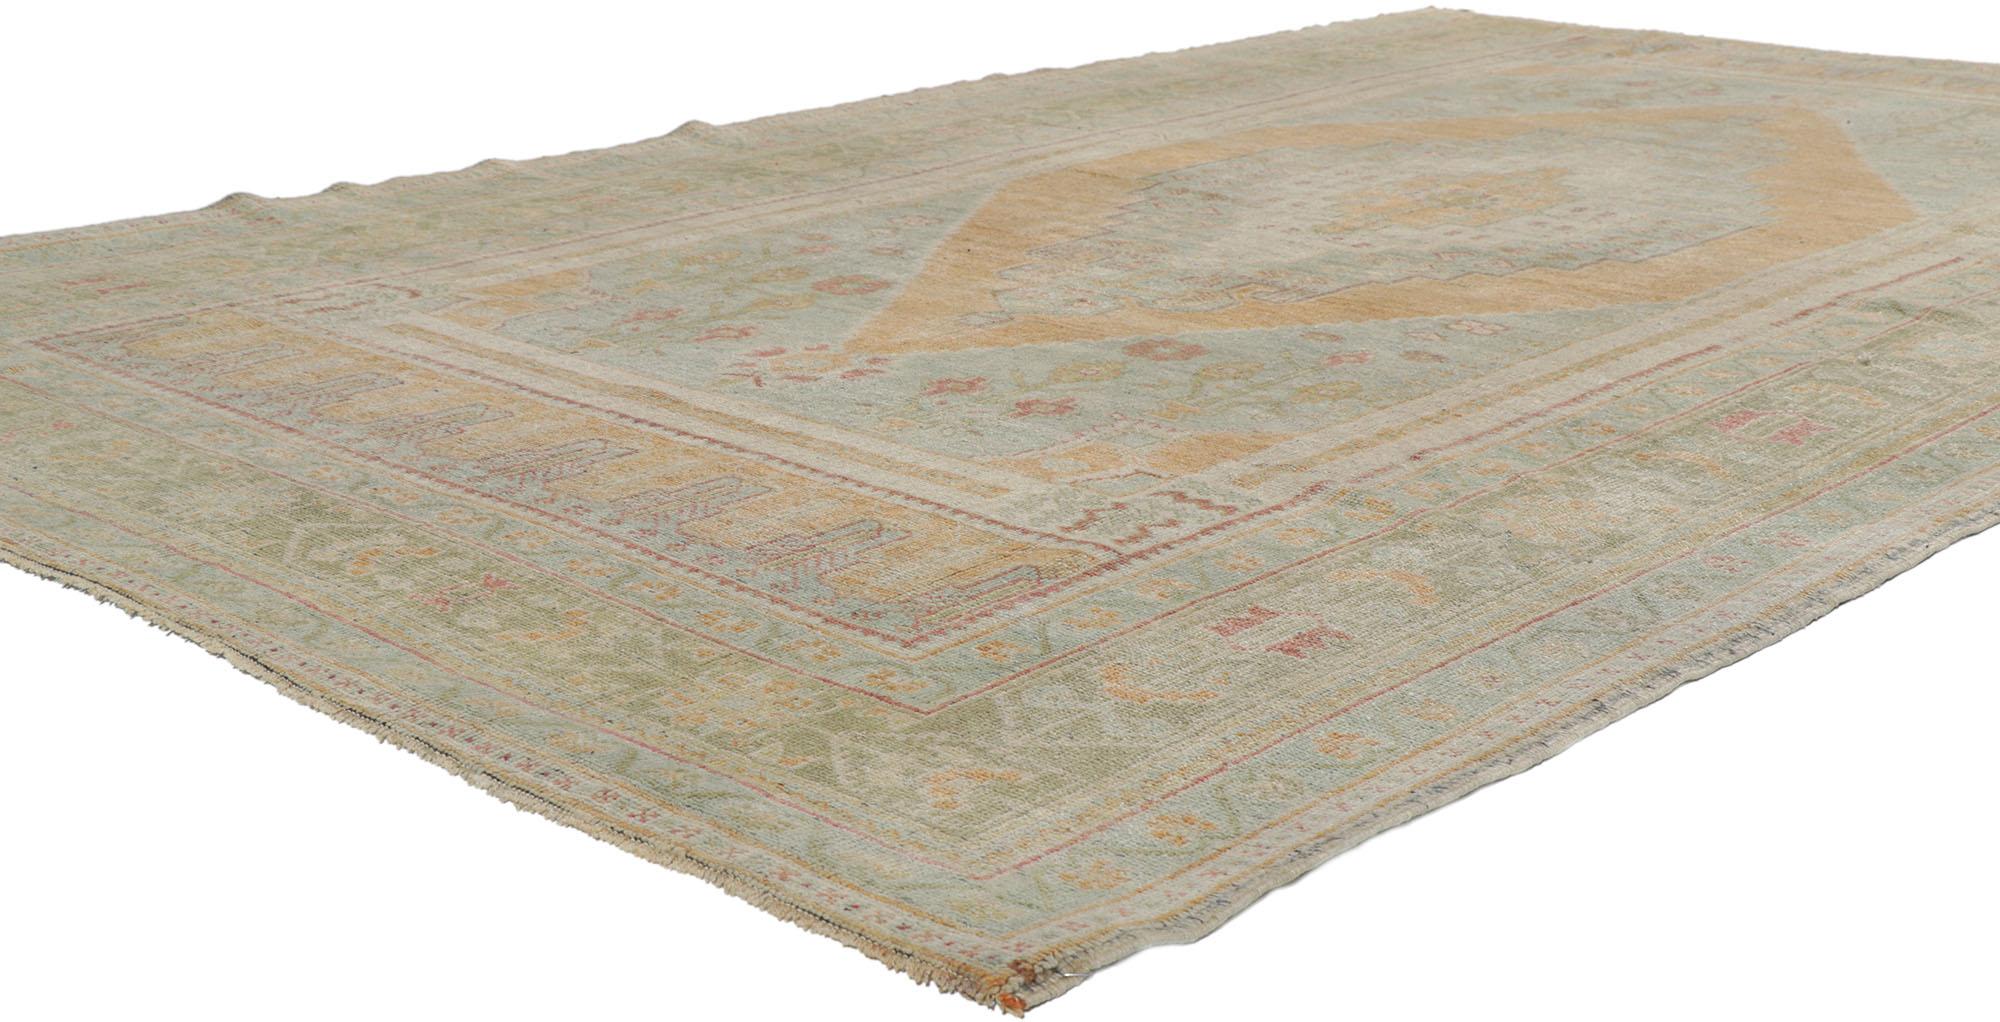 53692 Vintage Turkish Oushak Rug with Soft Earth-Tone Colors 06'00 x 10'00. Soft, bespoke vibes meet ancient traditions in this hand knotted wool vintage Turkish Oushak rug. The antique washed baby blue field features a large-scale concentric